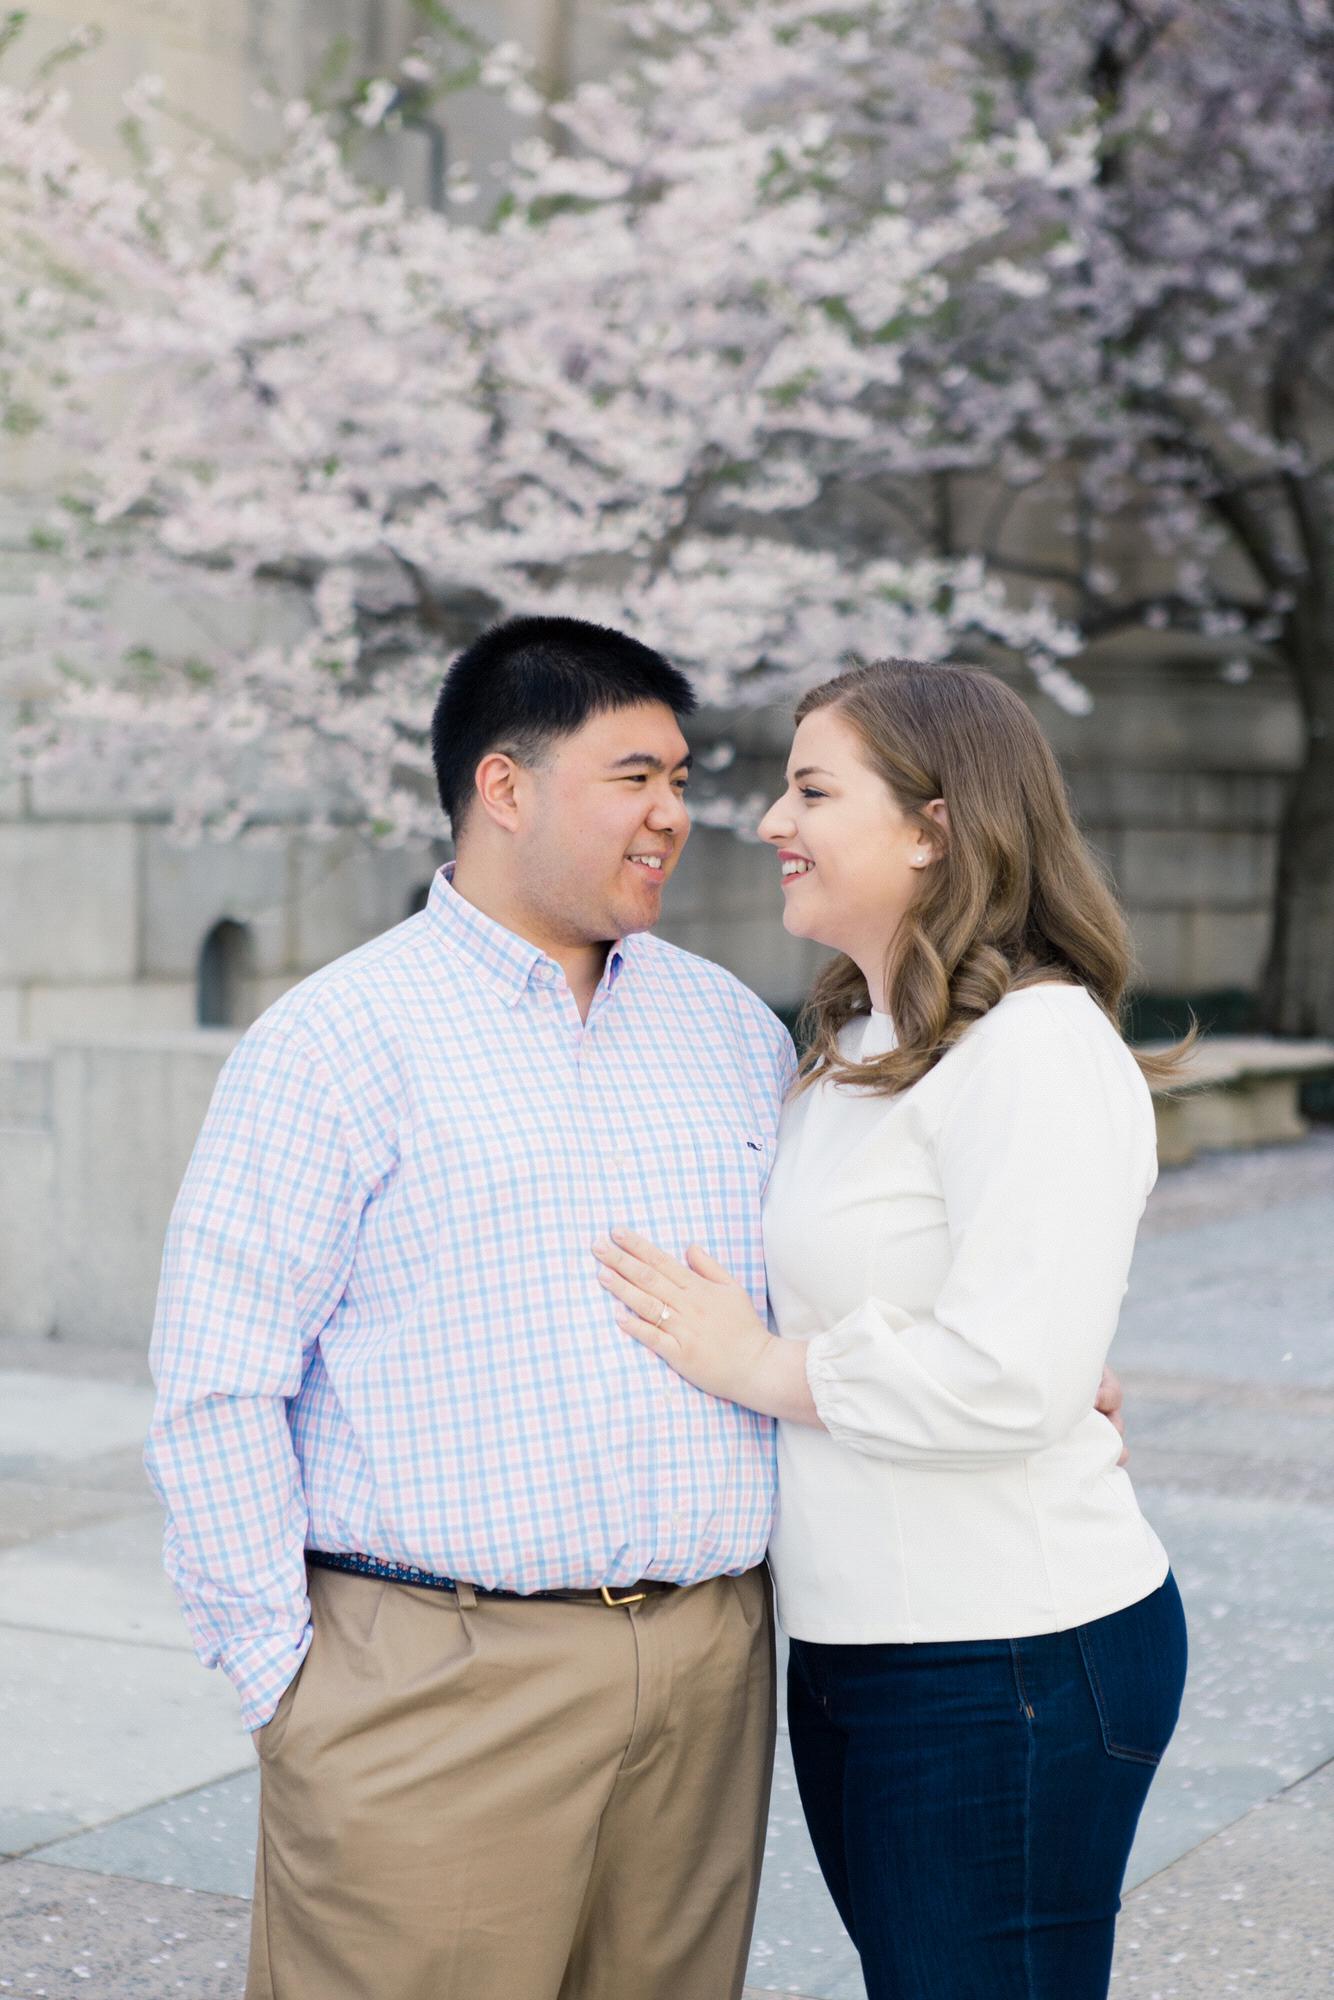 Cherry blossom engagement pictures at the Basilica of the National Shrine of the Immaculate Conception, March 2020. (Kate Grace Photography)